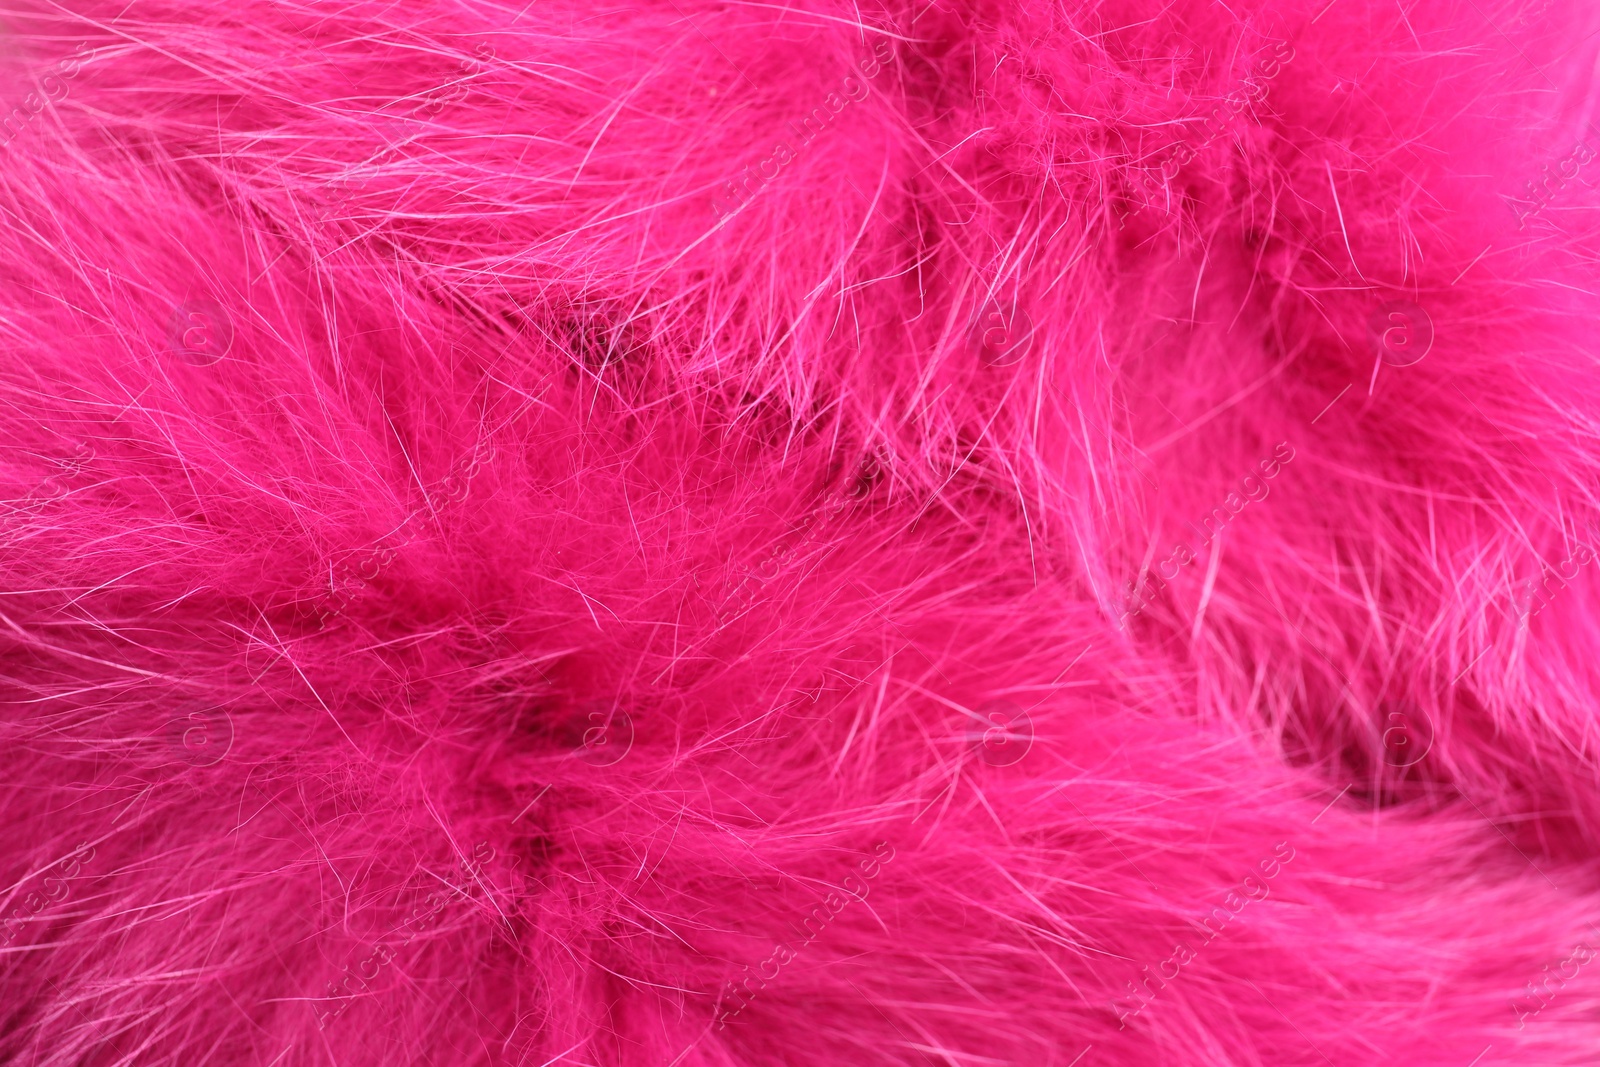 Photo of Texture of bright pink faux fur as background, closeup